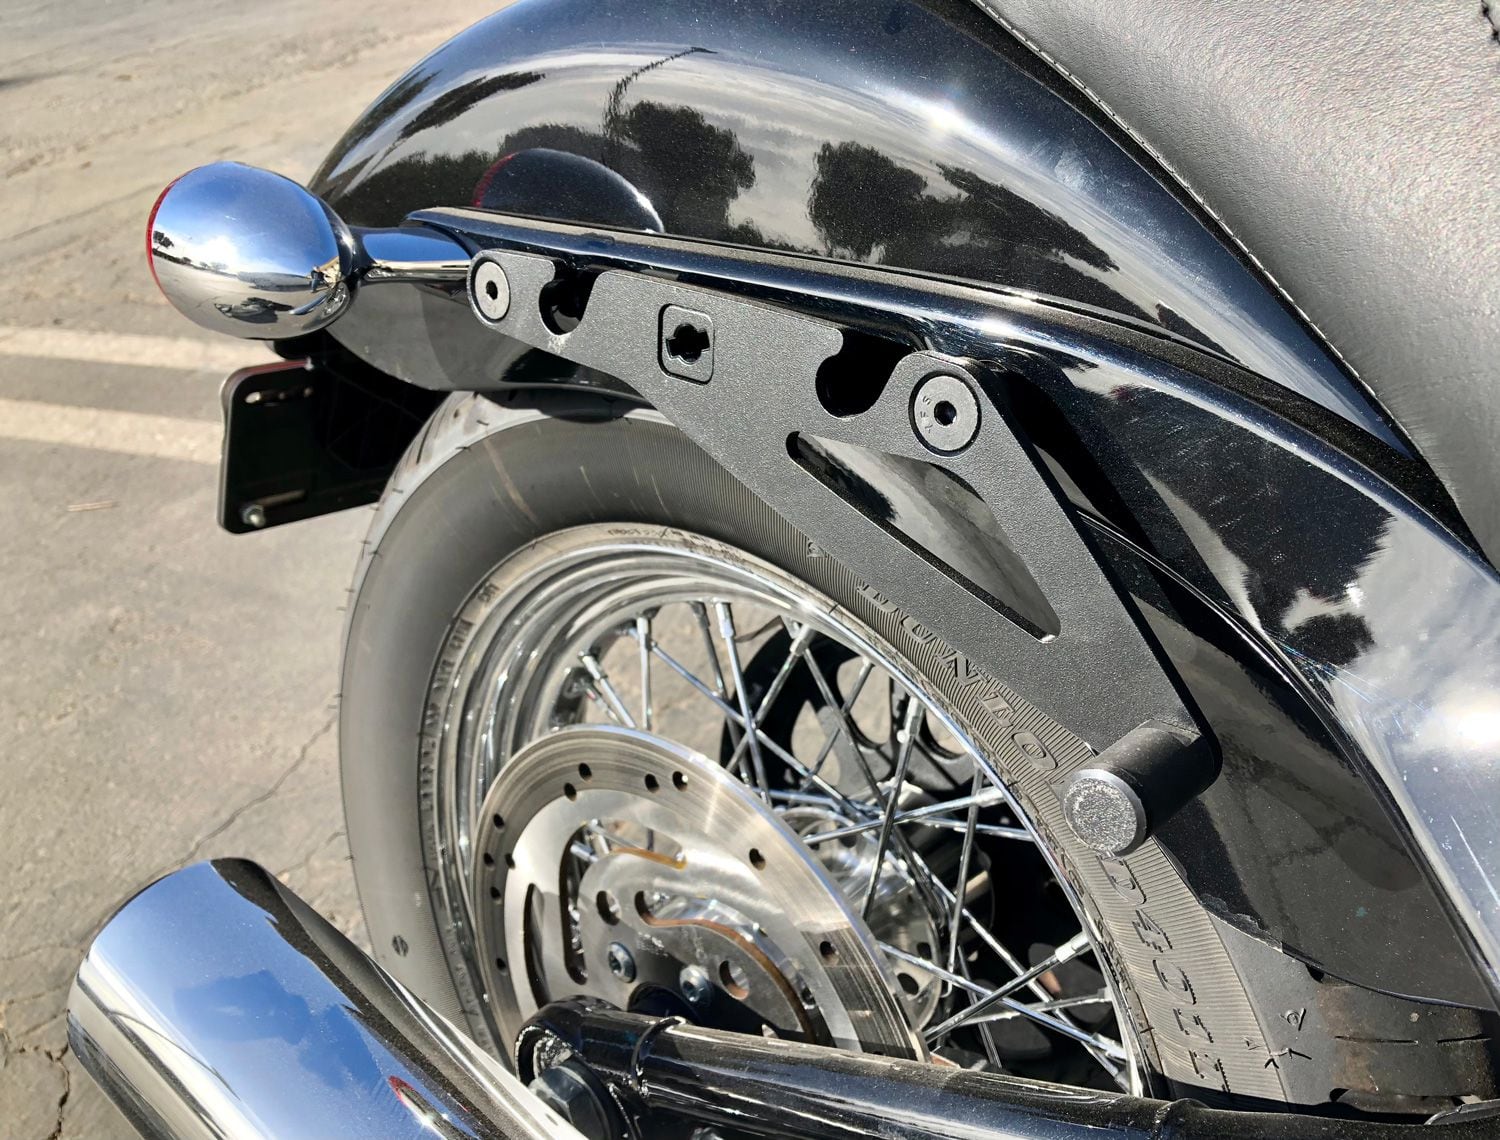 Simple, clean, and unobtrusive—this mounting bracket is all you see when the bag is off the bike.